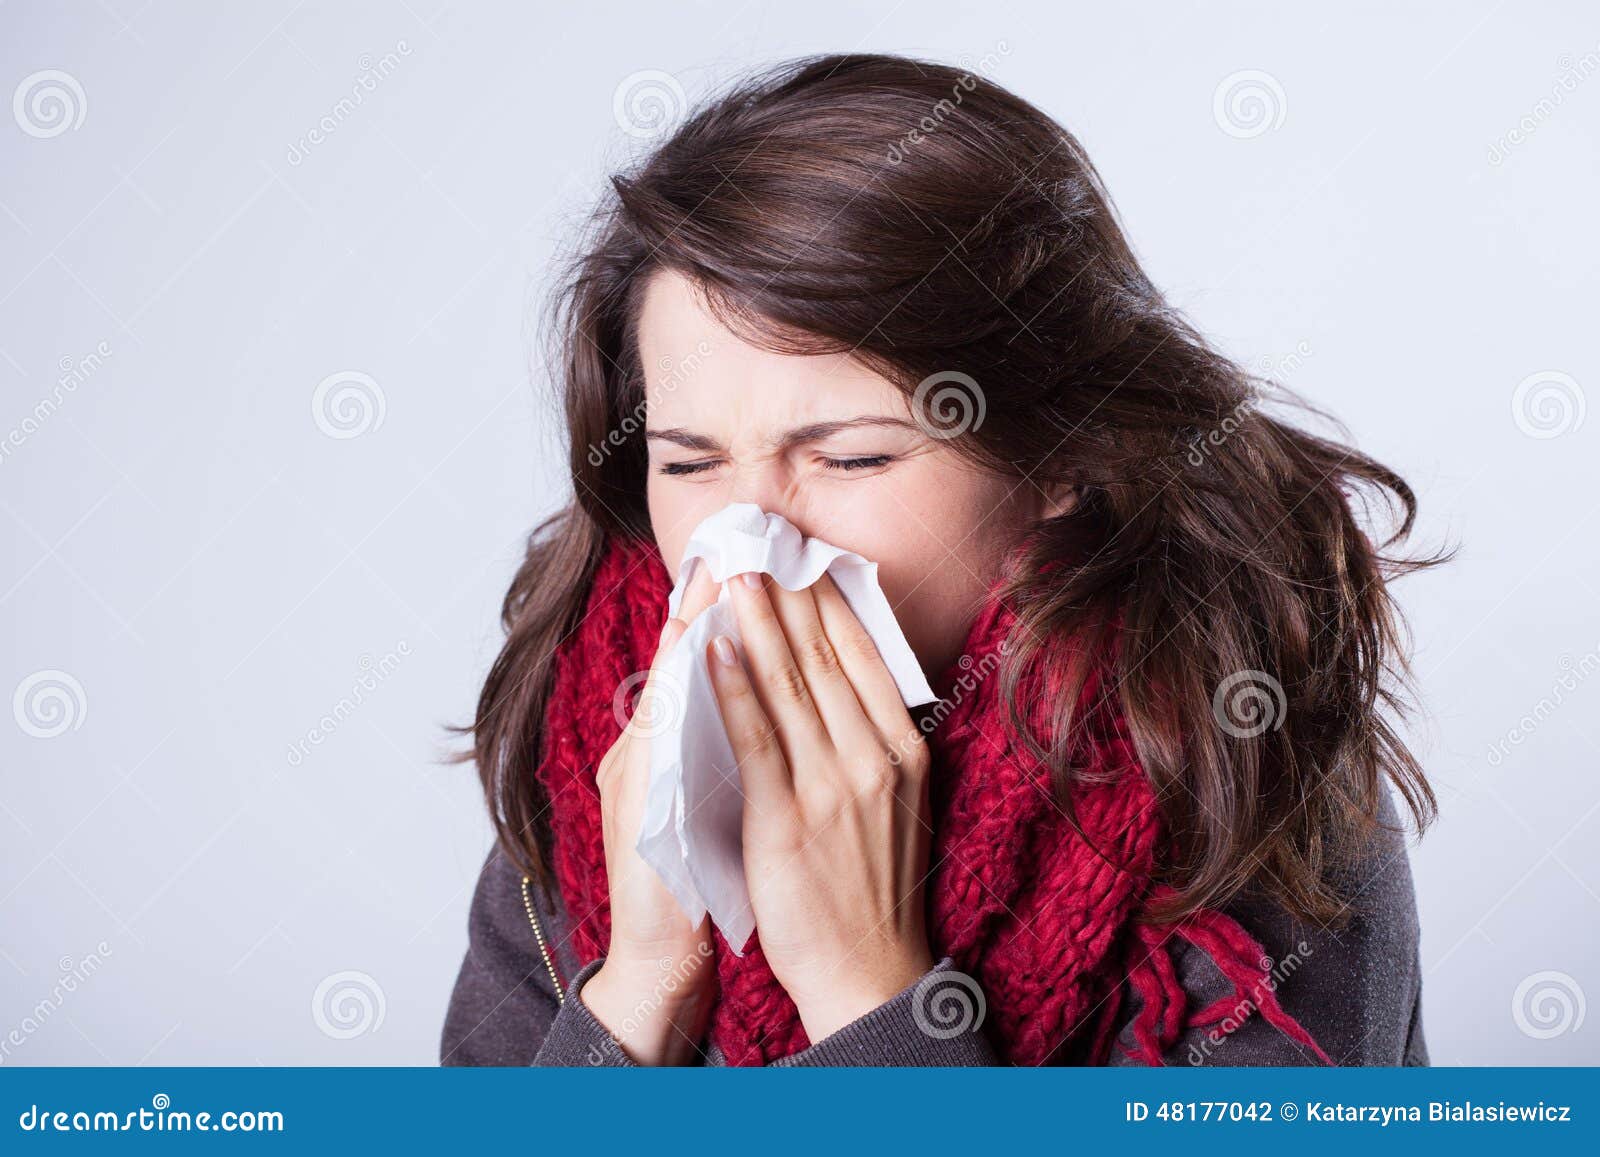 woman with runny nose